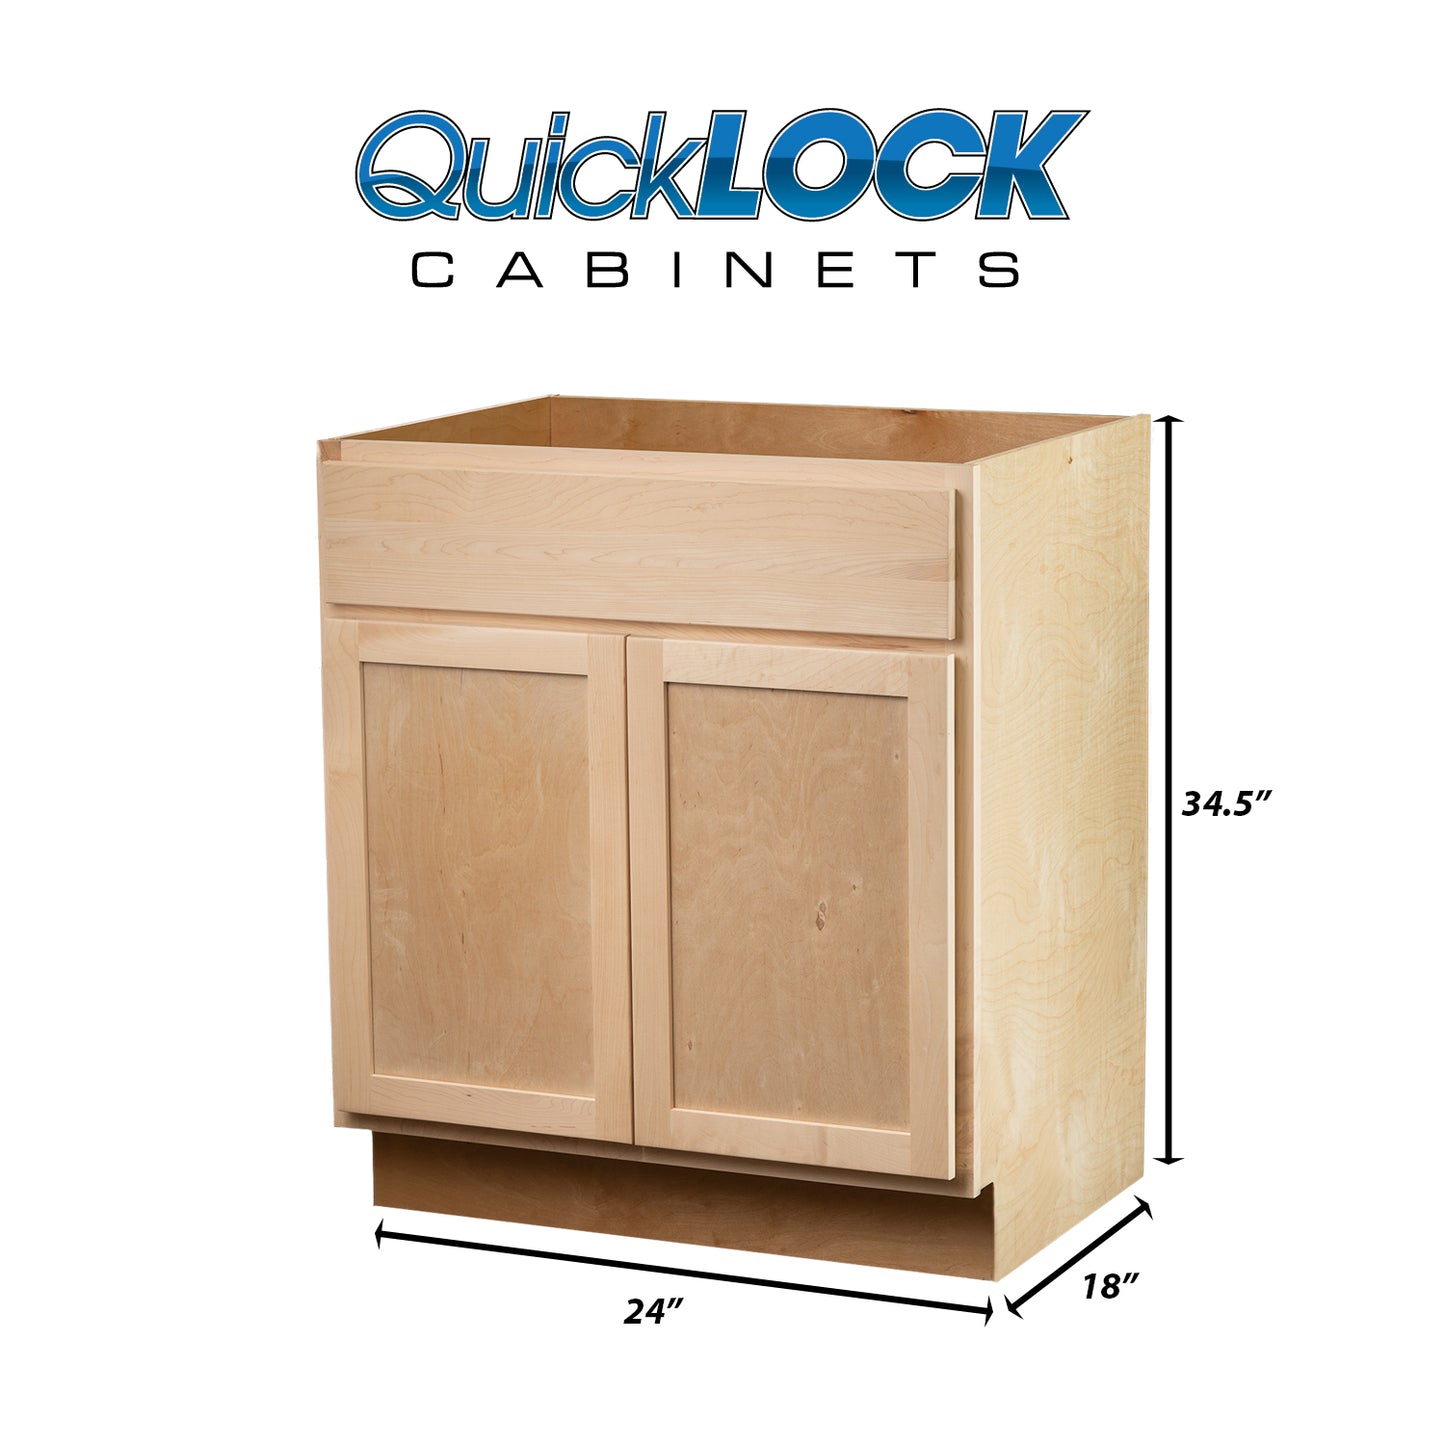 Quicklock RTA (Ready-to-Assemble) Raw Maple Vanity Base Cabinet | 24"Wx34.5"Hx18"D